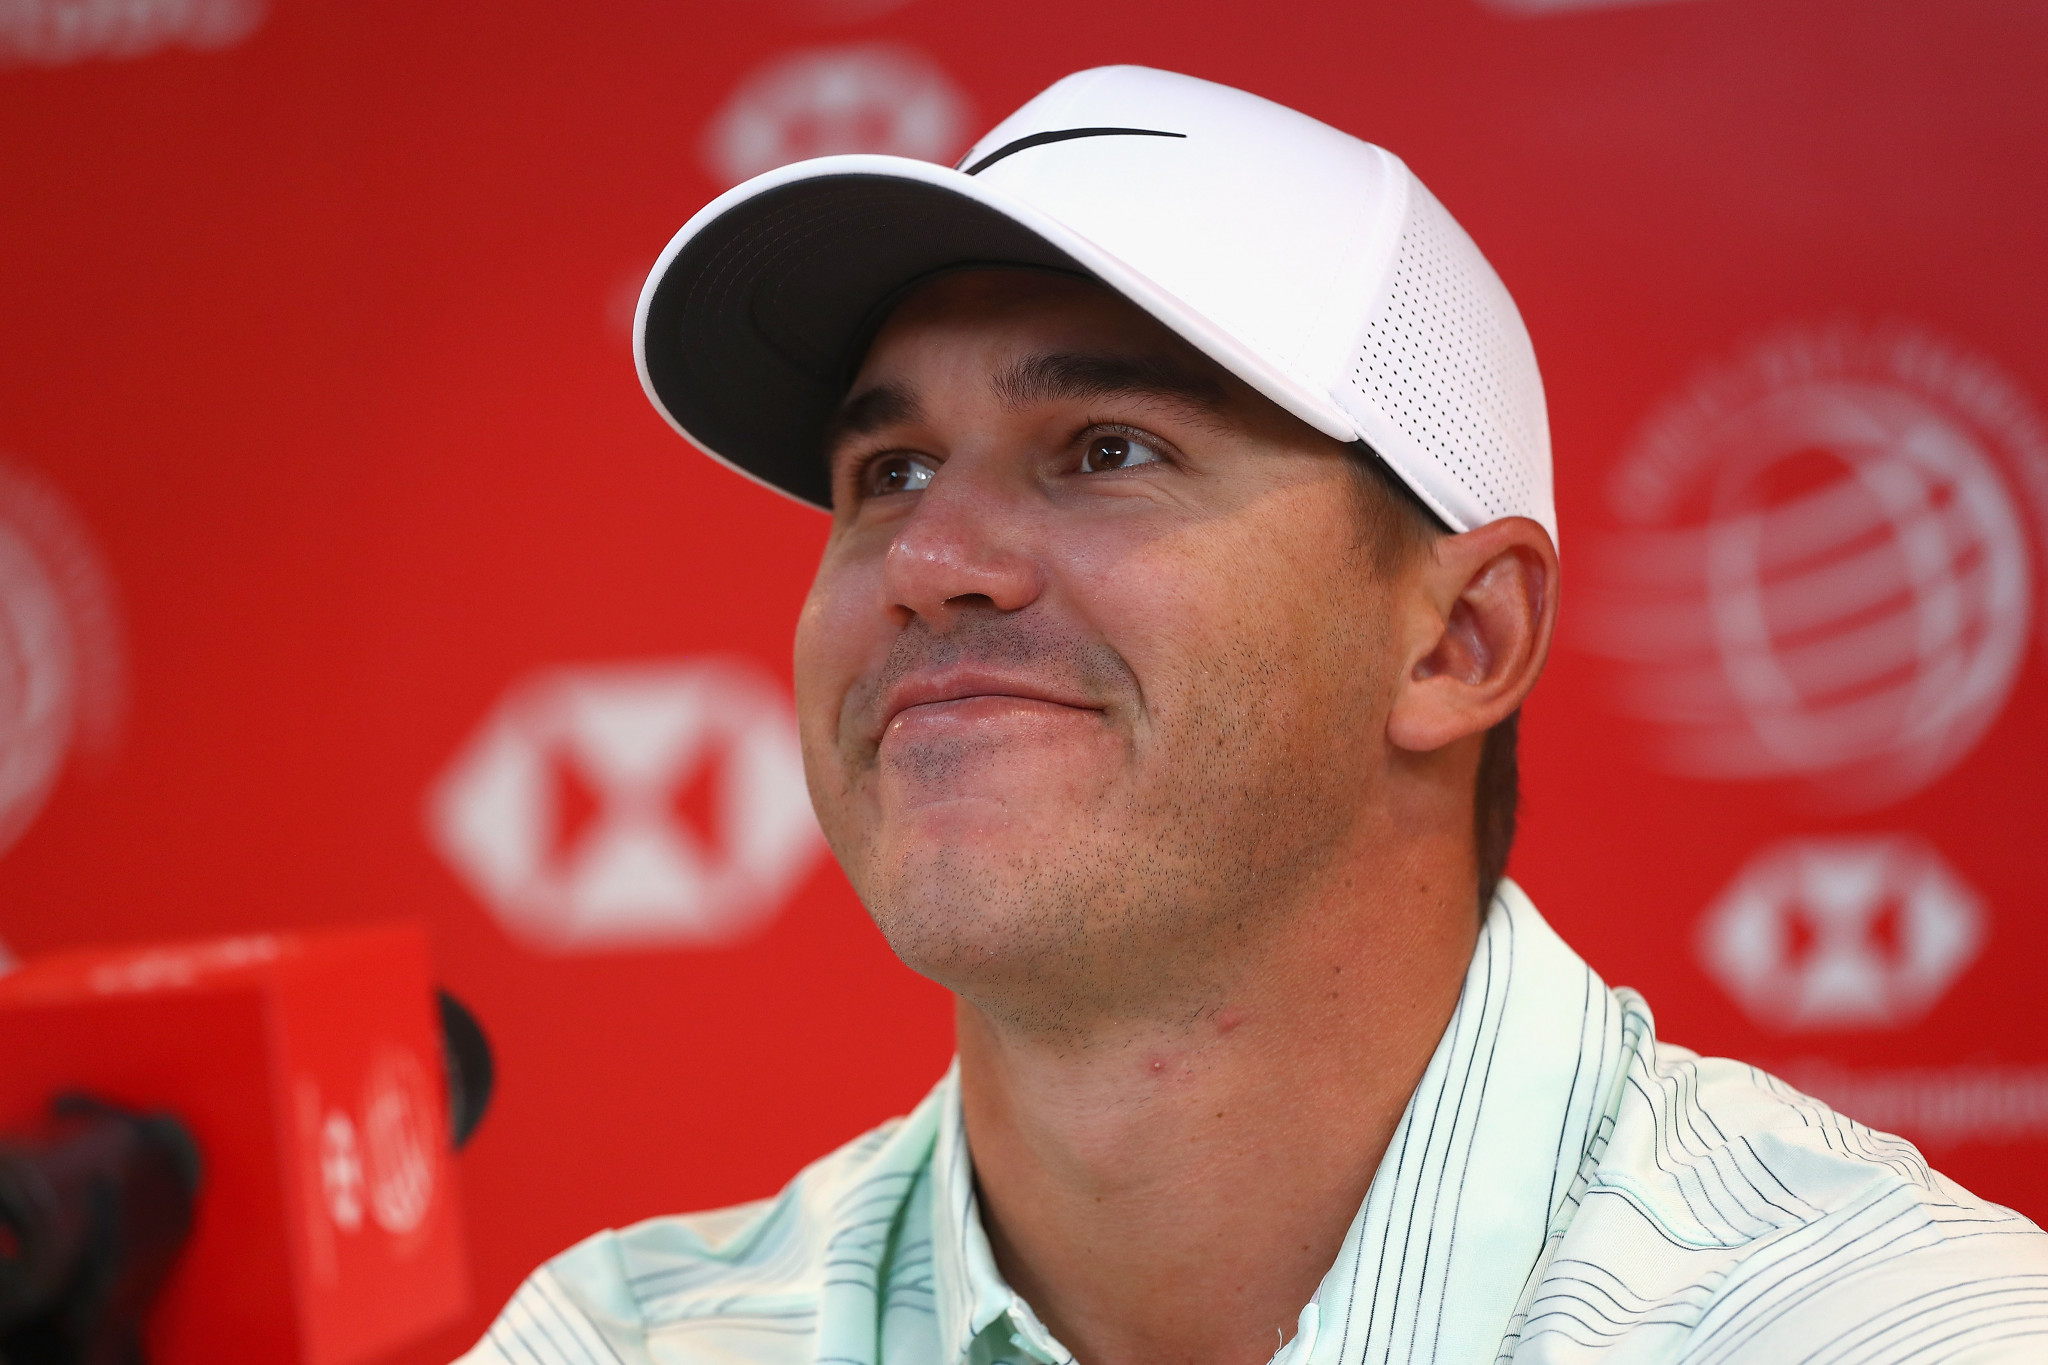 Koepka keen to retain new world number one status at World Golf Championships in Shanghai